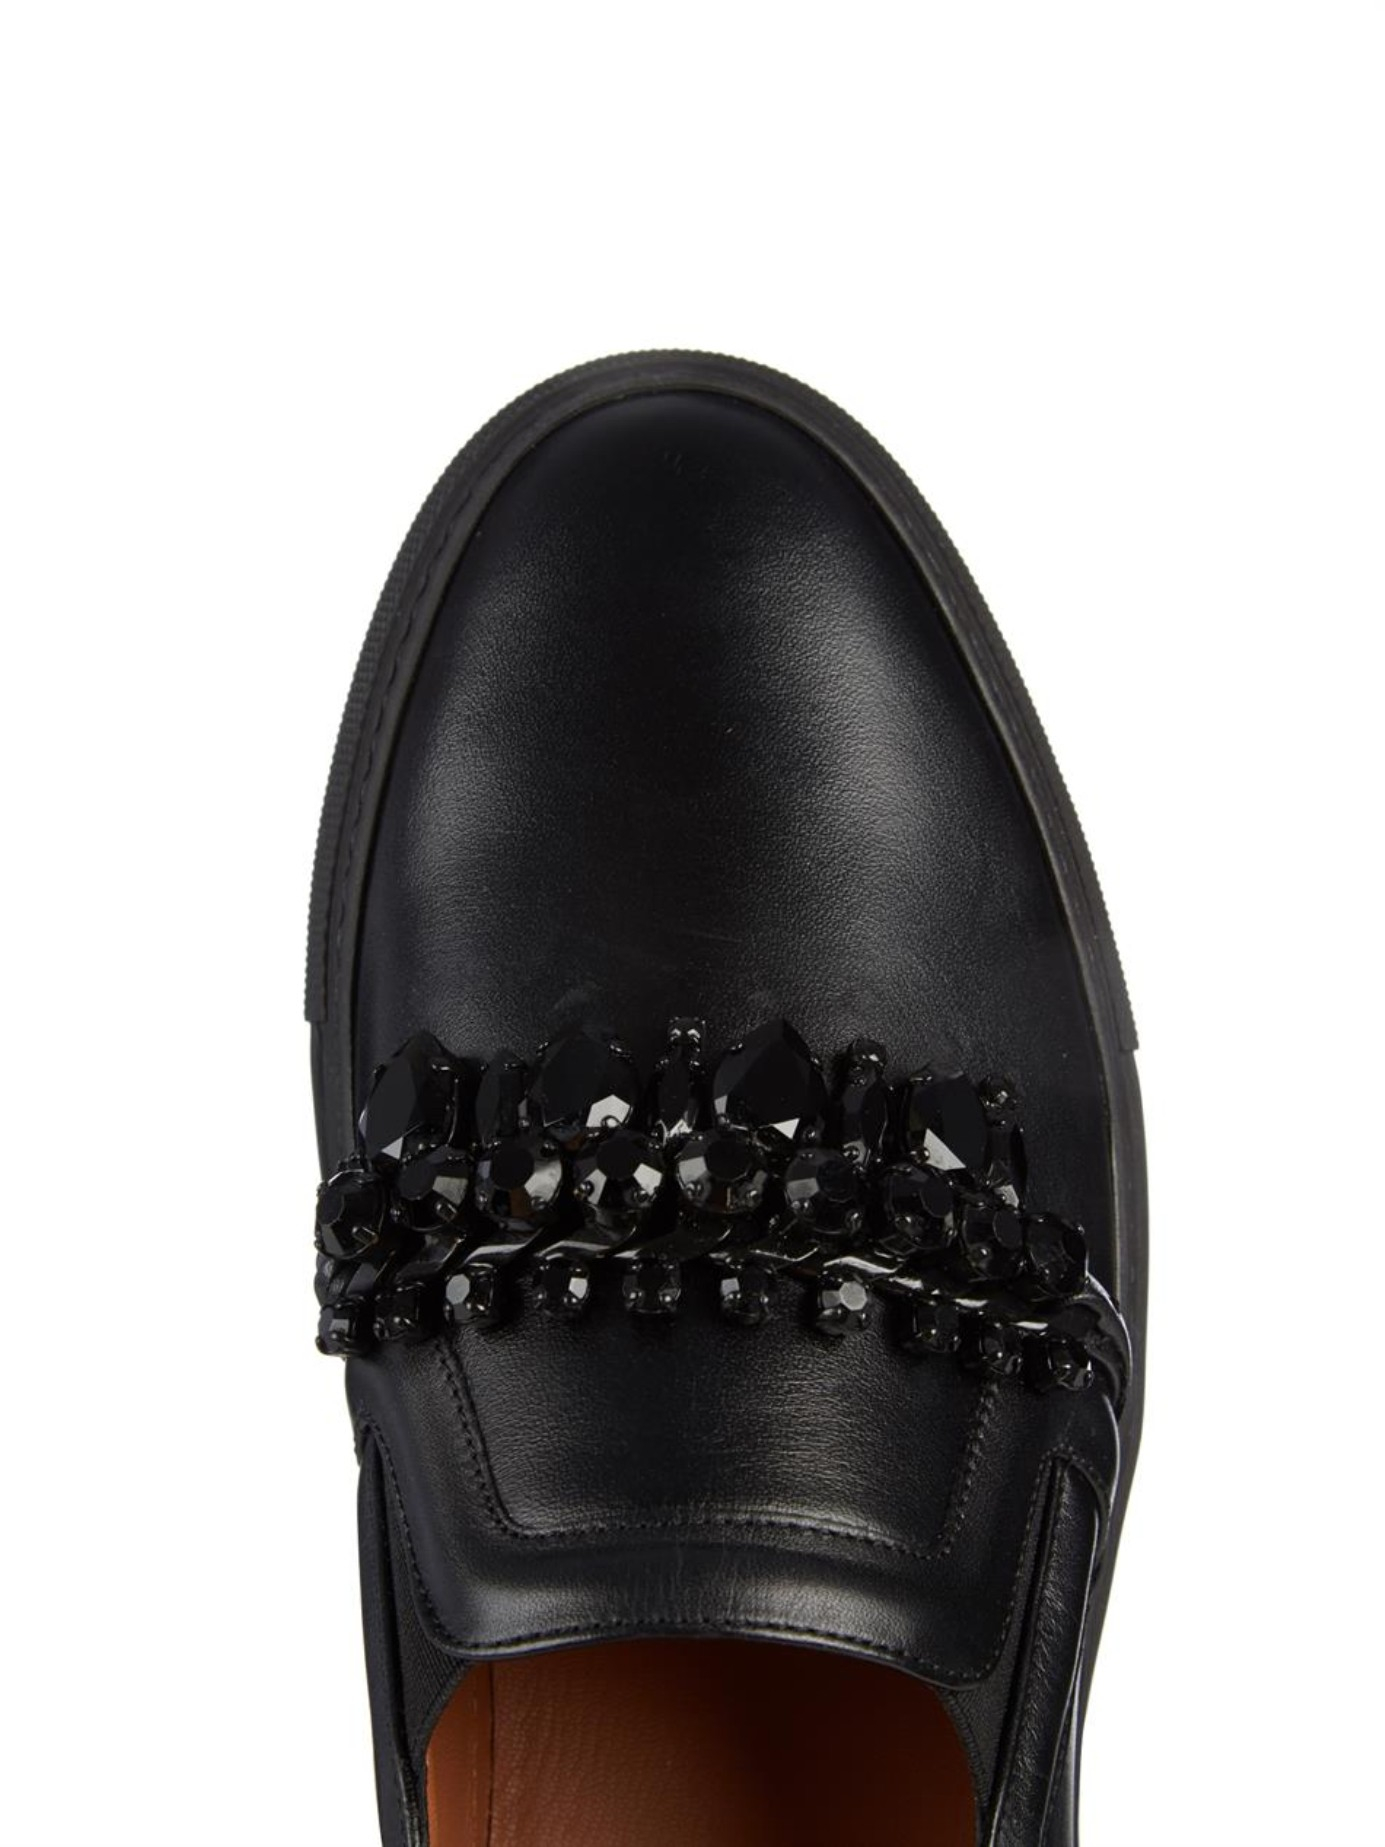 Lyst - Givenchy Leather And Jewel-Embellished Skate Shoes in Black